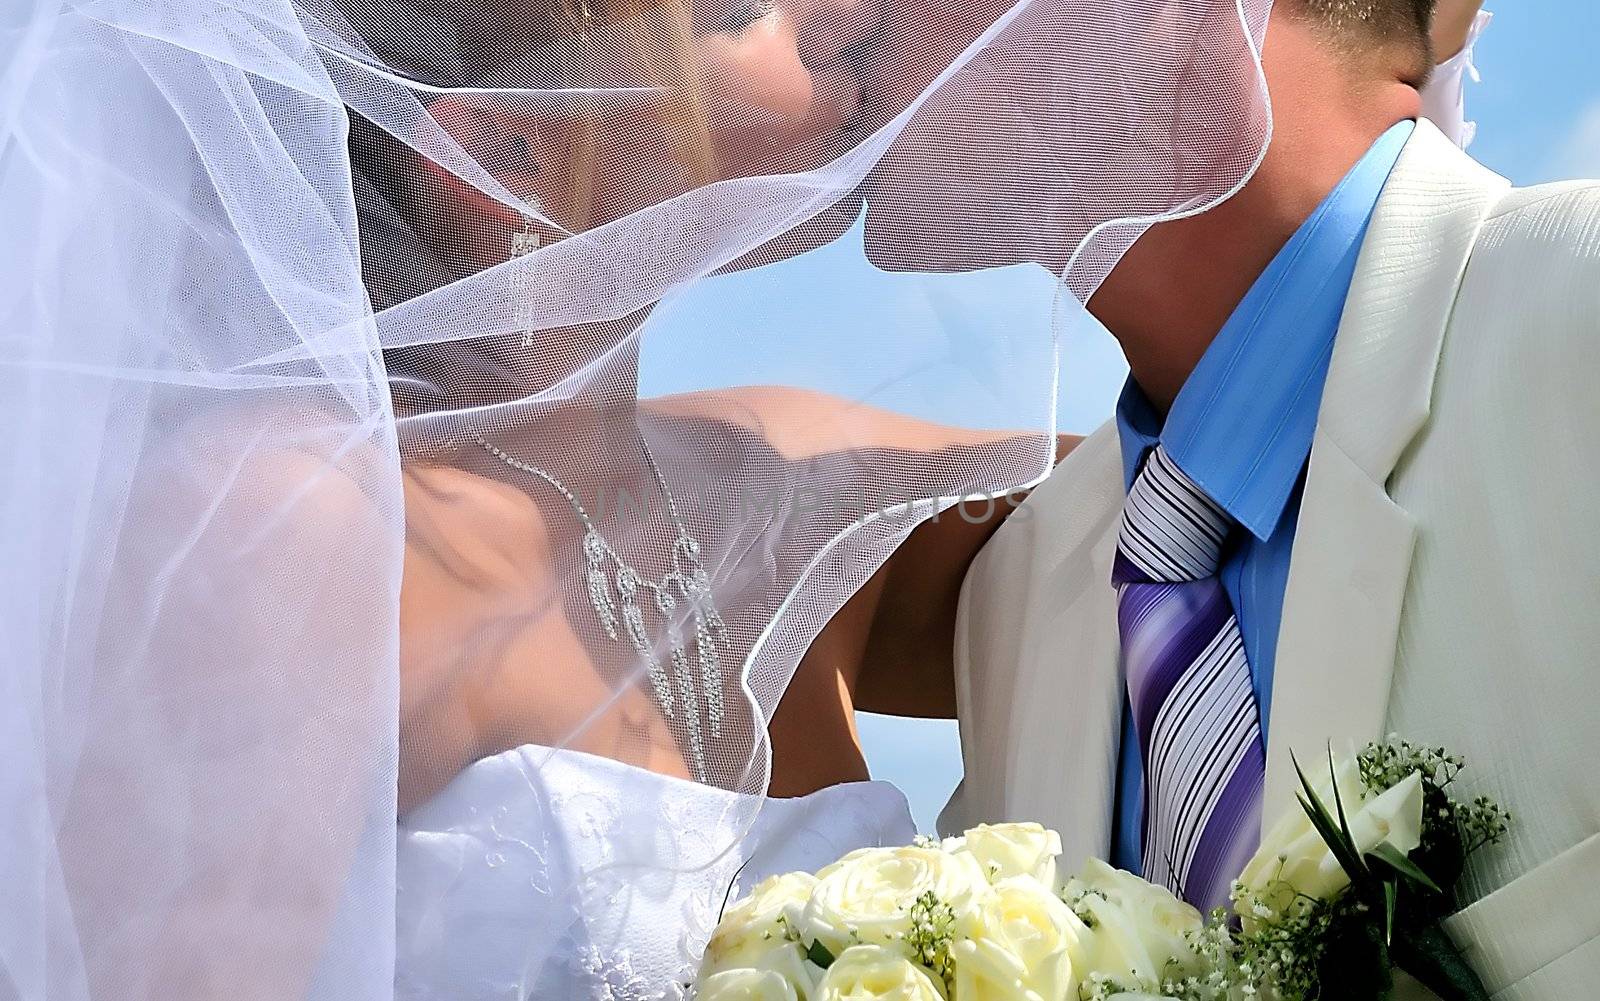 wedding passionative kiss of bride and groom under blue sky